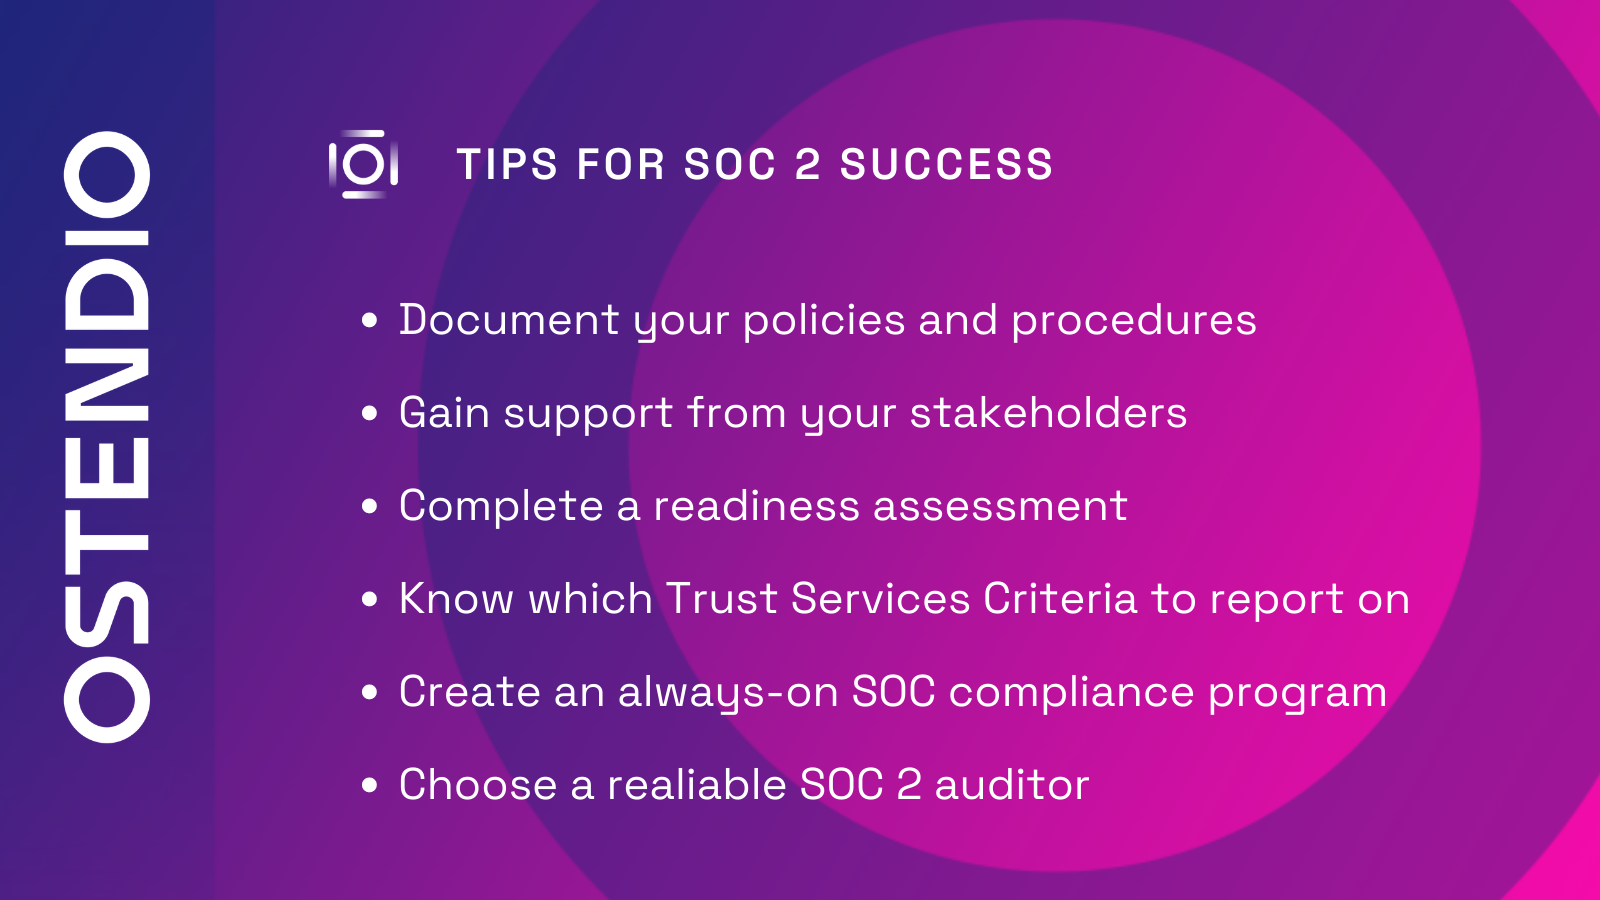 Tips for SOC 2 Compliance Success